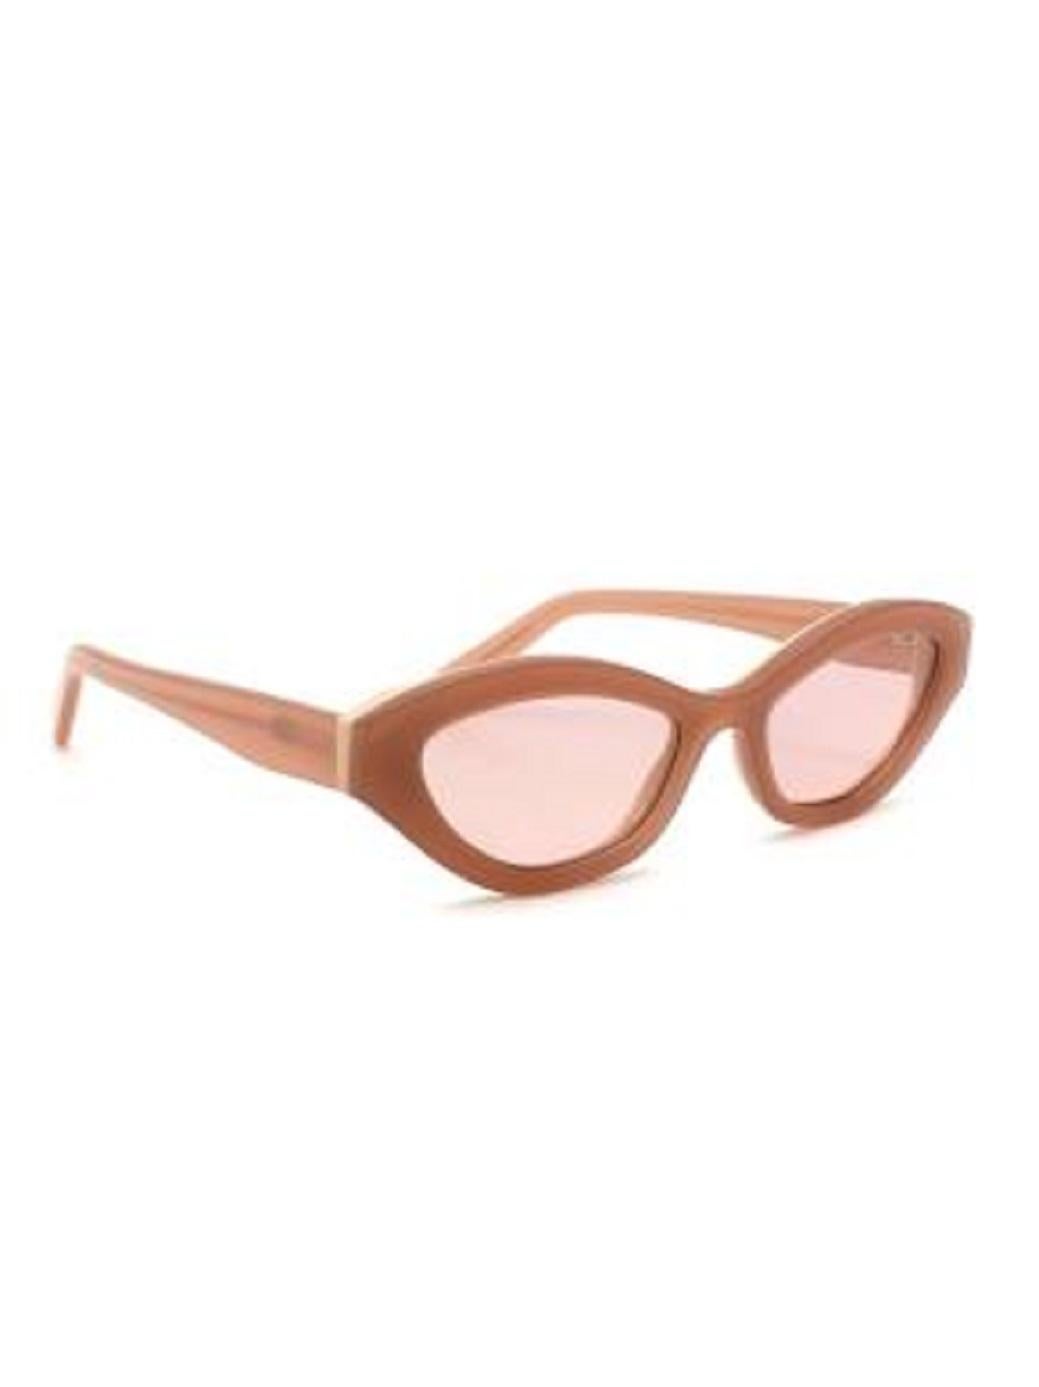 Zimmermann Beige acetate Prima cat-eye sunglasses In Excellent Condition For Sale In London, GB